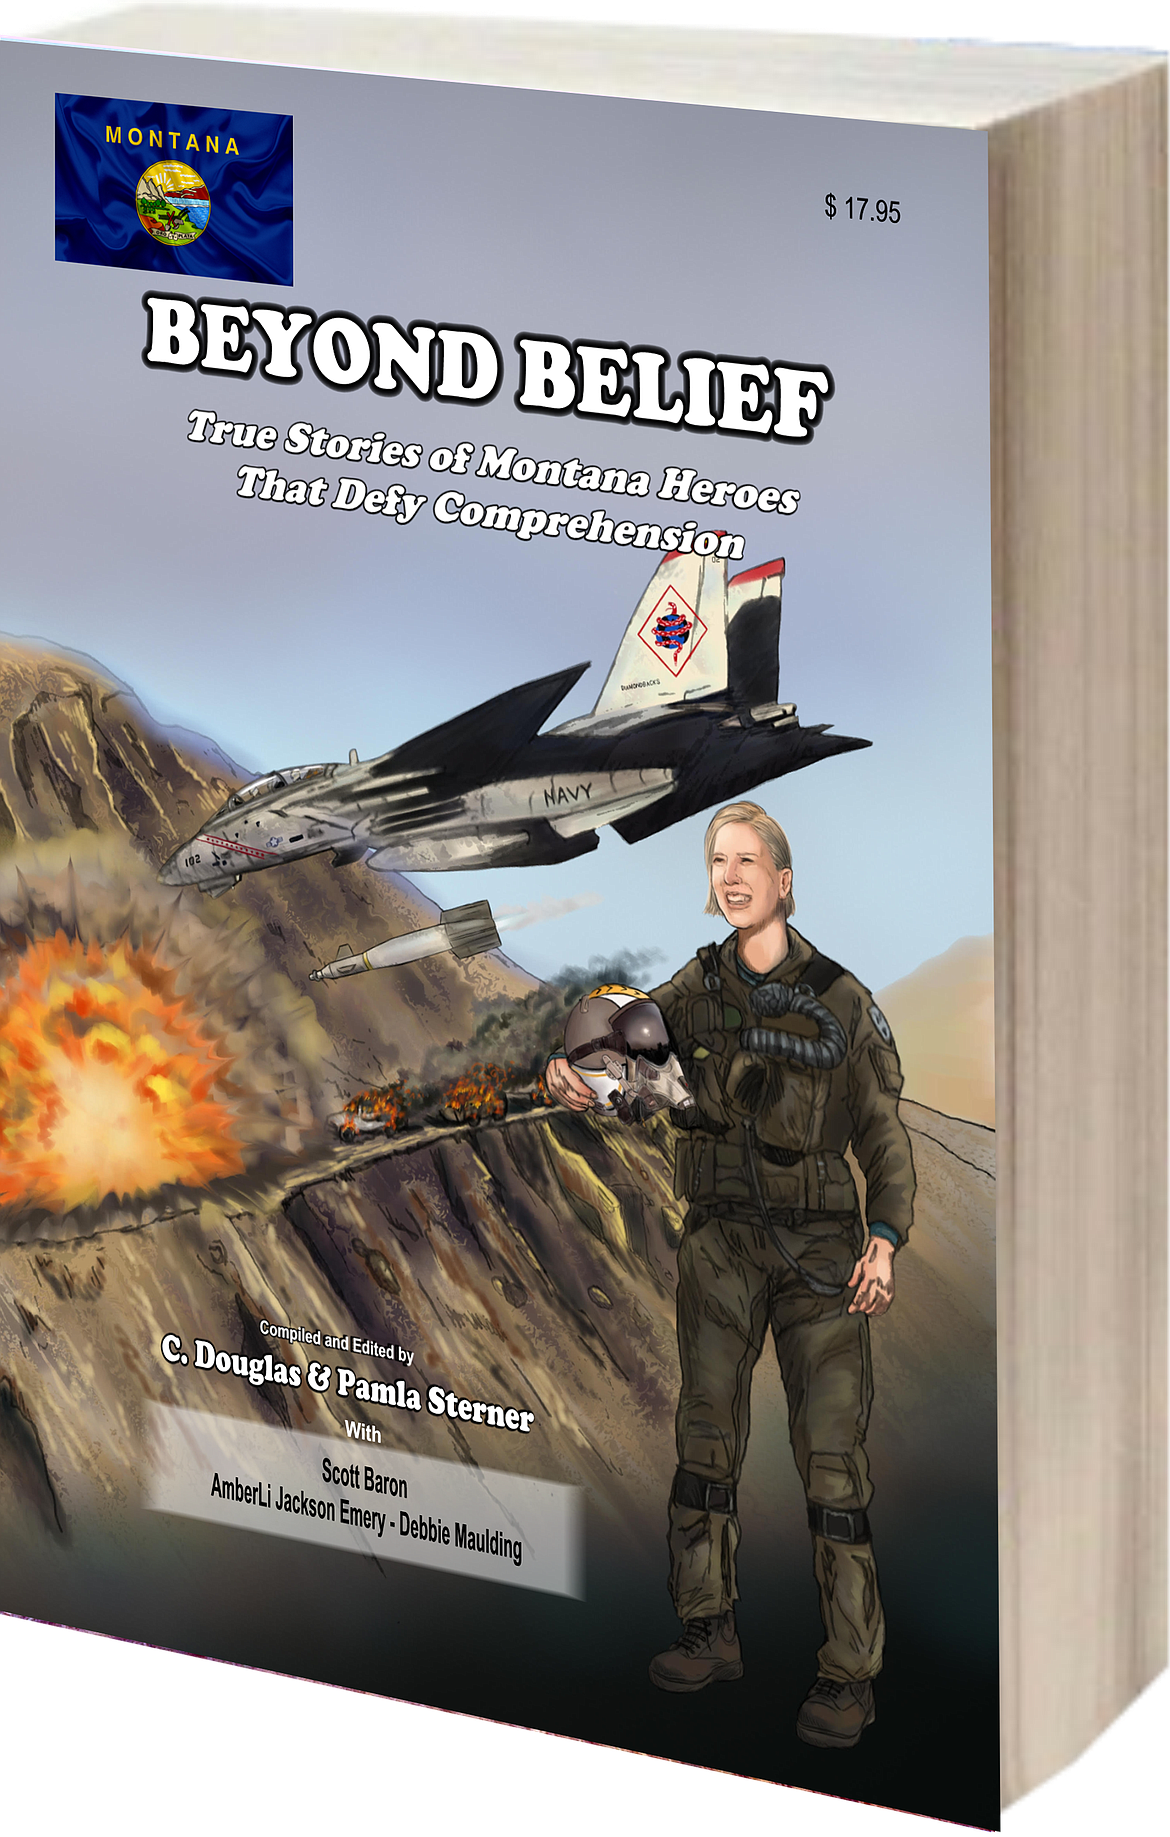 The book “Beyond Belief: True Stories of Montana Heroes That Defy Comprehension” by Doug Sterner is set to be released on July 1.